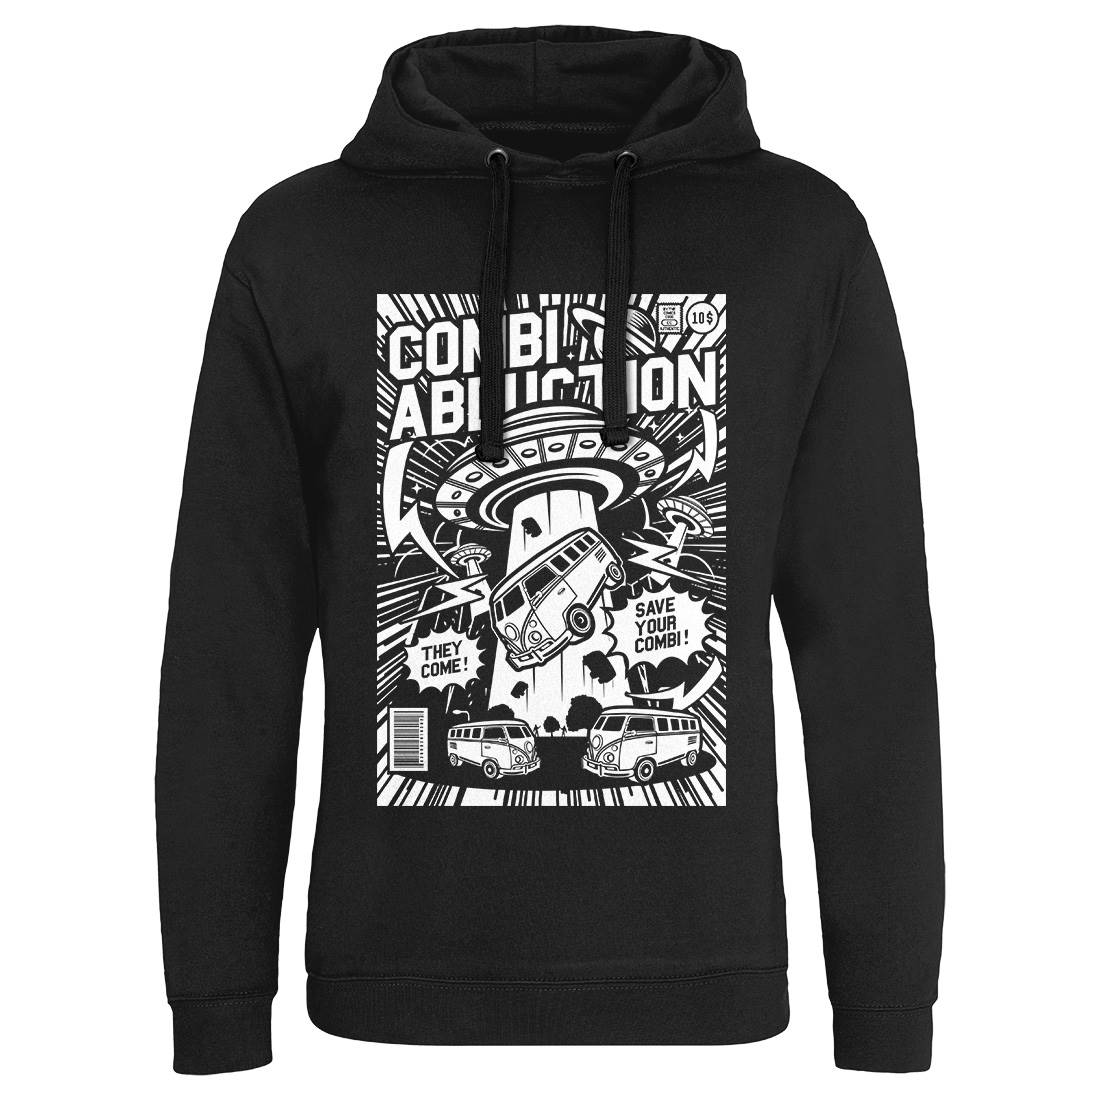 Combi Abduction Mens Hoodie Without Pocket Space A220